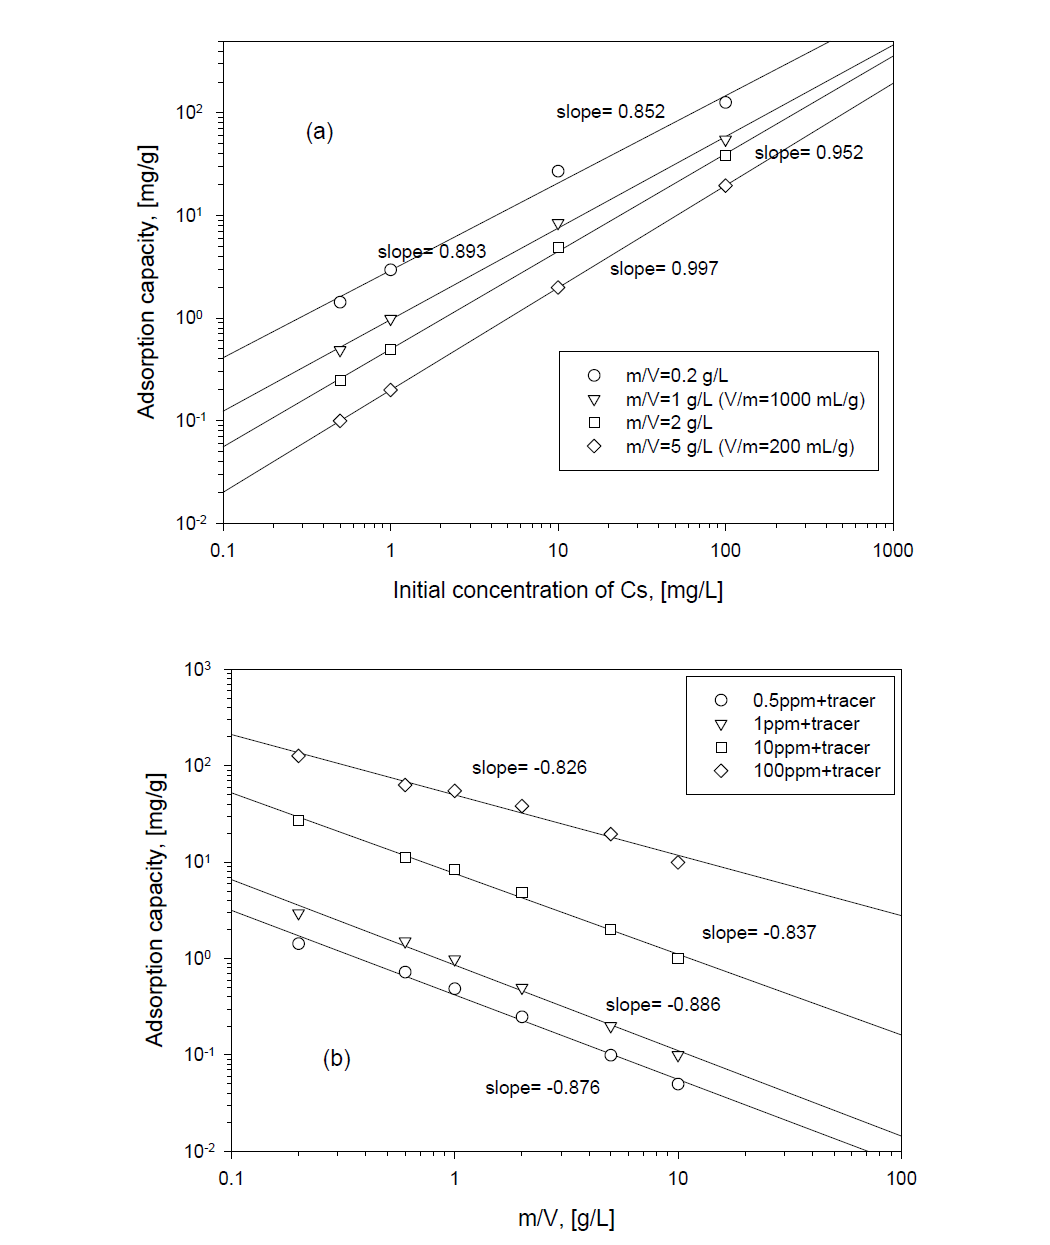 Adsorption capacity of Cs by IE911 silicotitanate with initial concentration of Cs (a) and ratio of m/V (b).